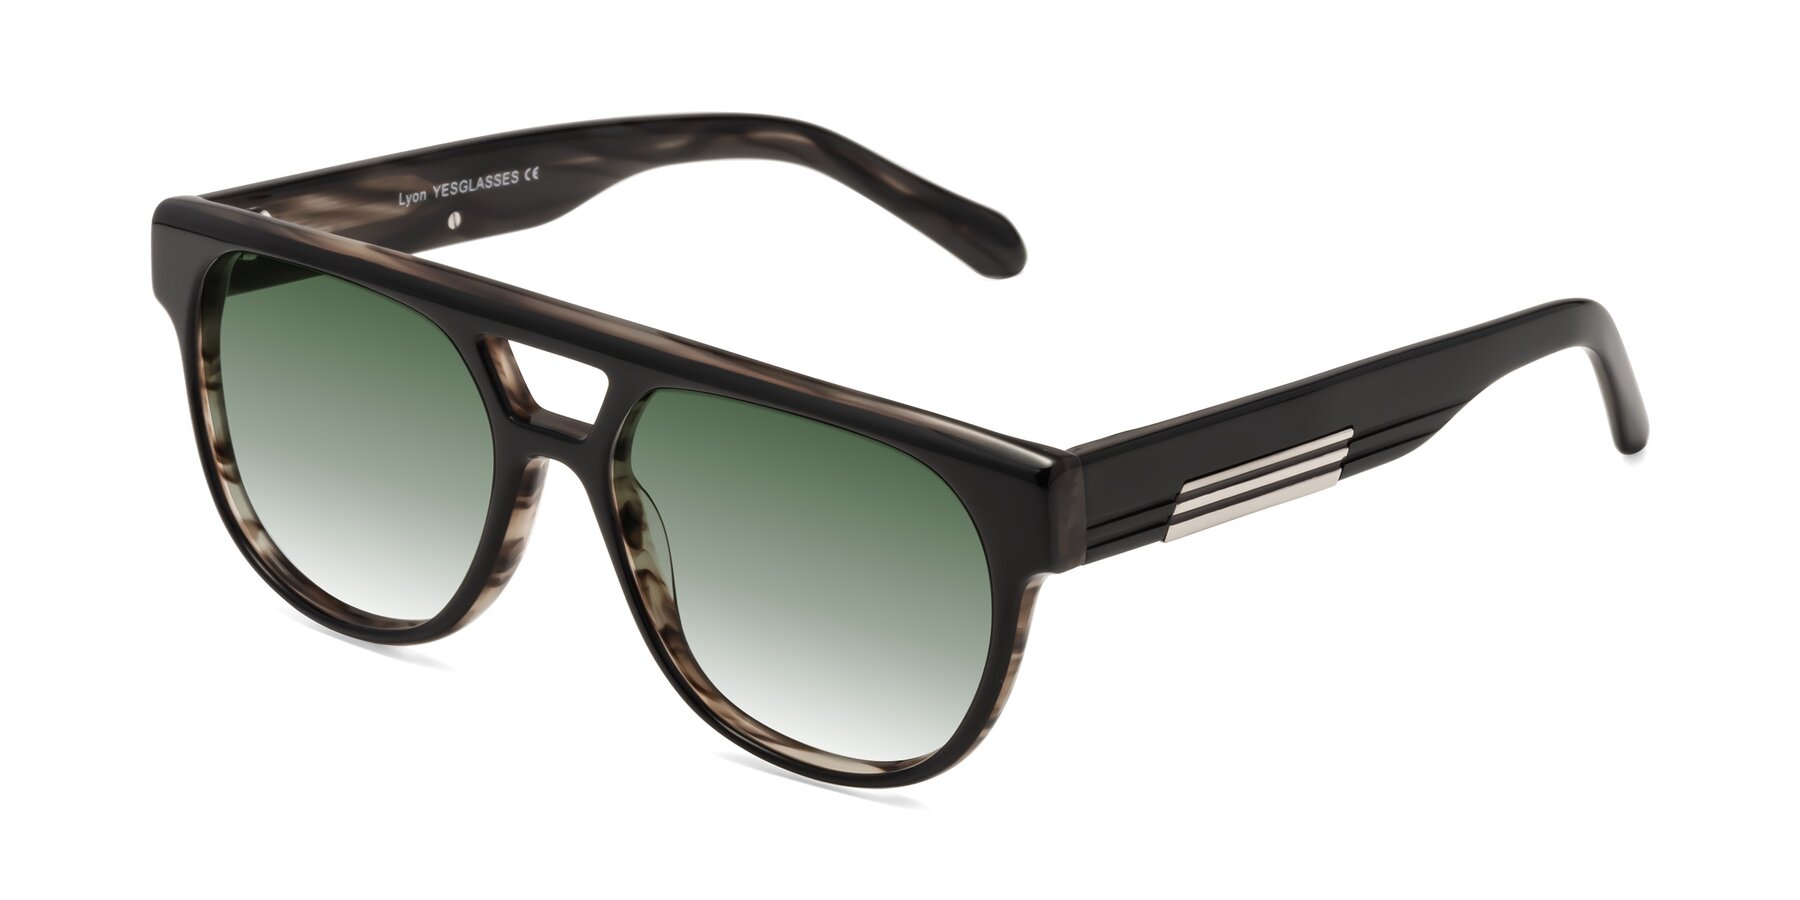 Angle of Lyon in Black-Brown with Green Gradient Lenses